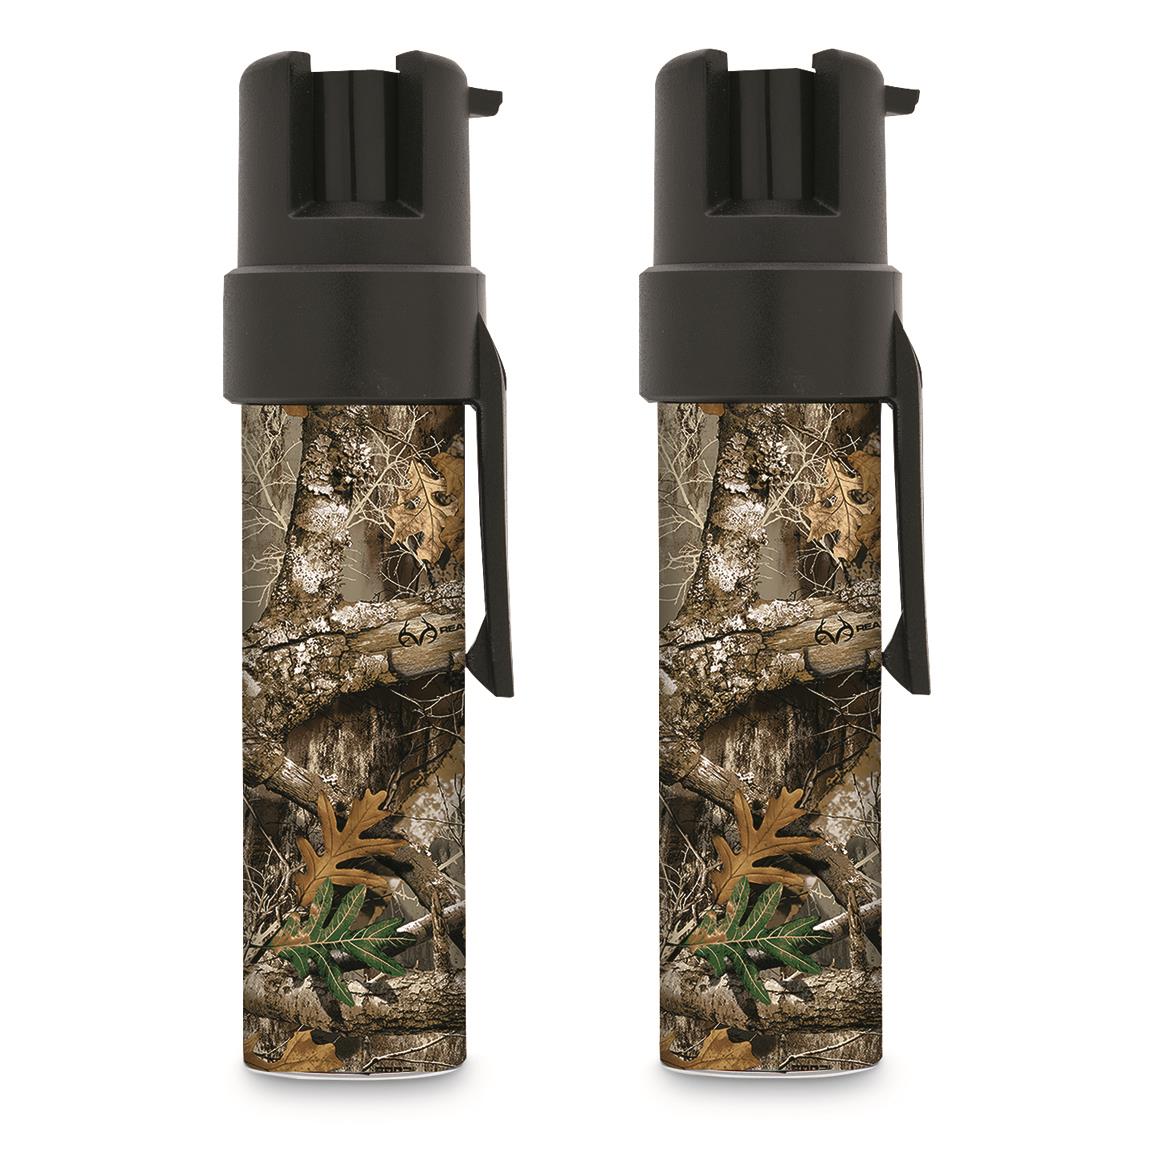 Sabre Red Realtree Edge Compact Pepper Spray with Clip, 2 Pack